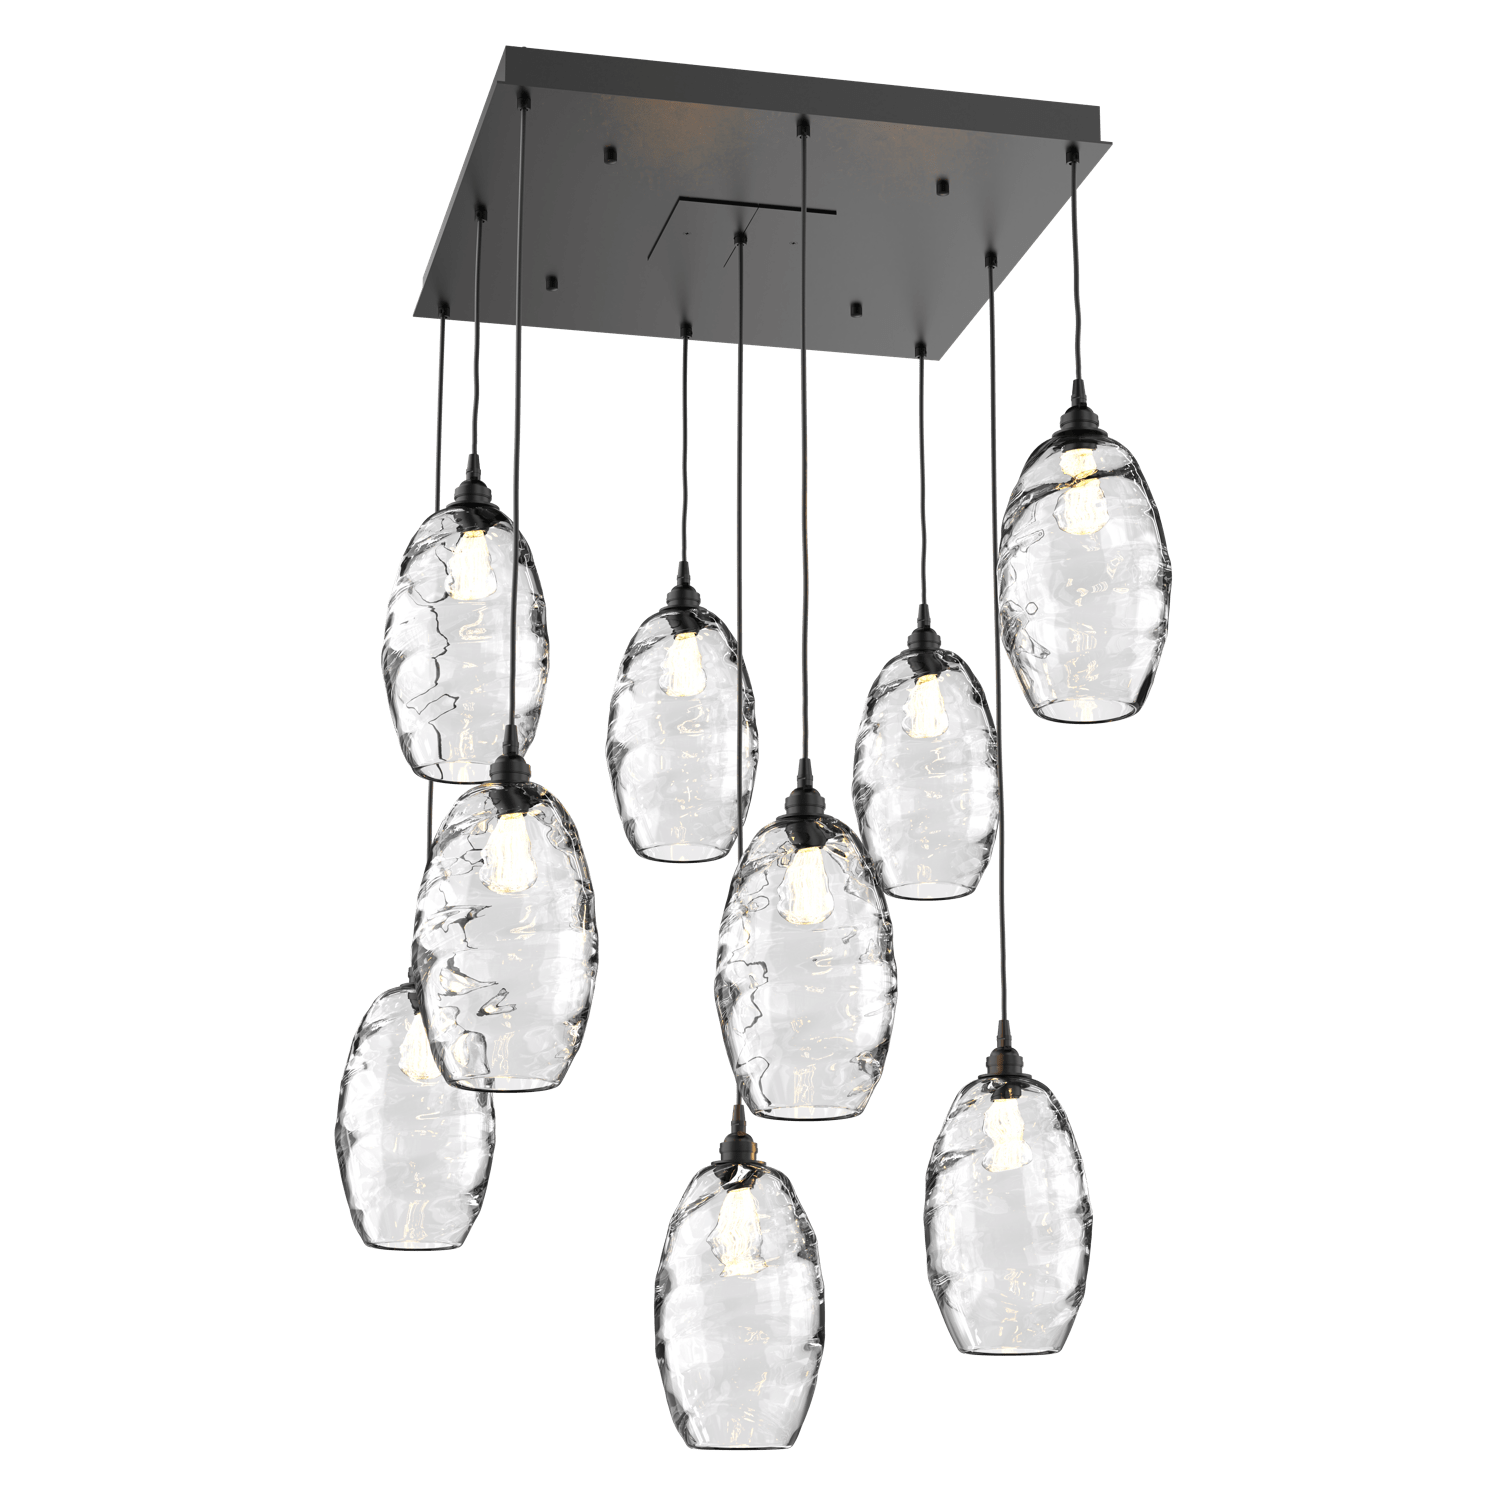 CHB0035-09-MB-OC-Hammerton-Studio-Optic-Blown-Glass-Elisse-9-light-square-pendant-chandelier-with-matte-black-finish-and-optic-clear-blown-glass-shades-and-incandescent-lamping